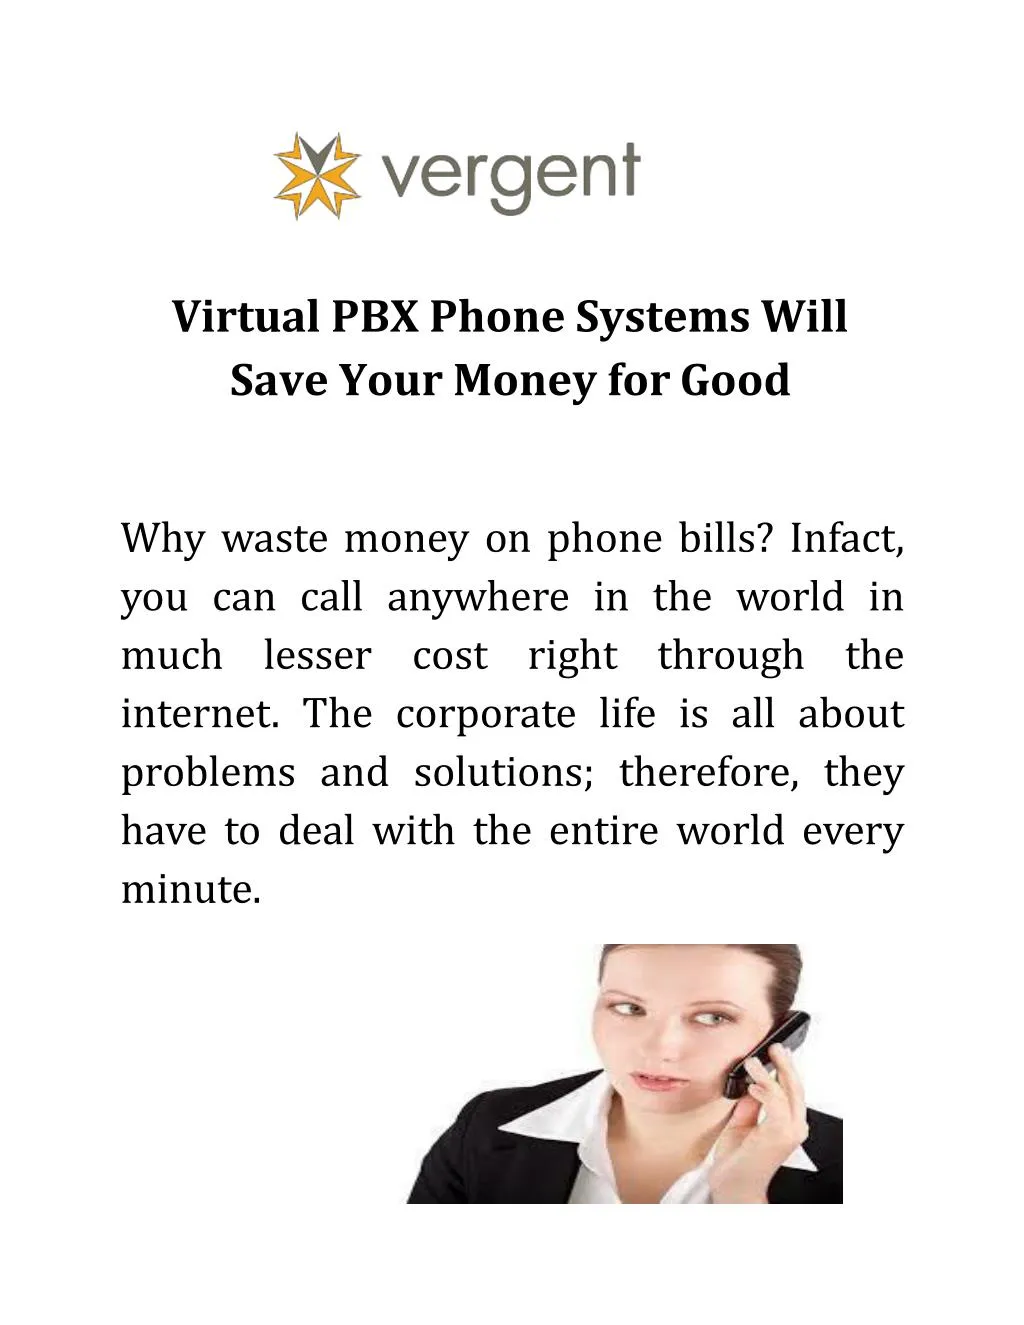 virtual pbx phone systems will save your money for good